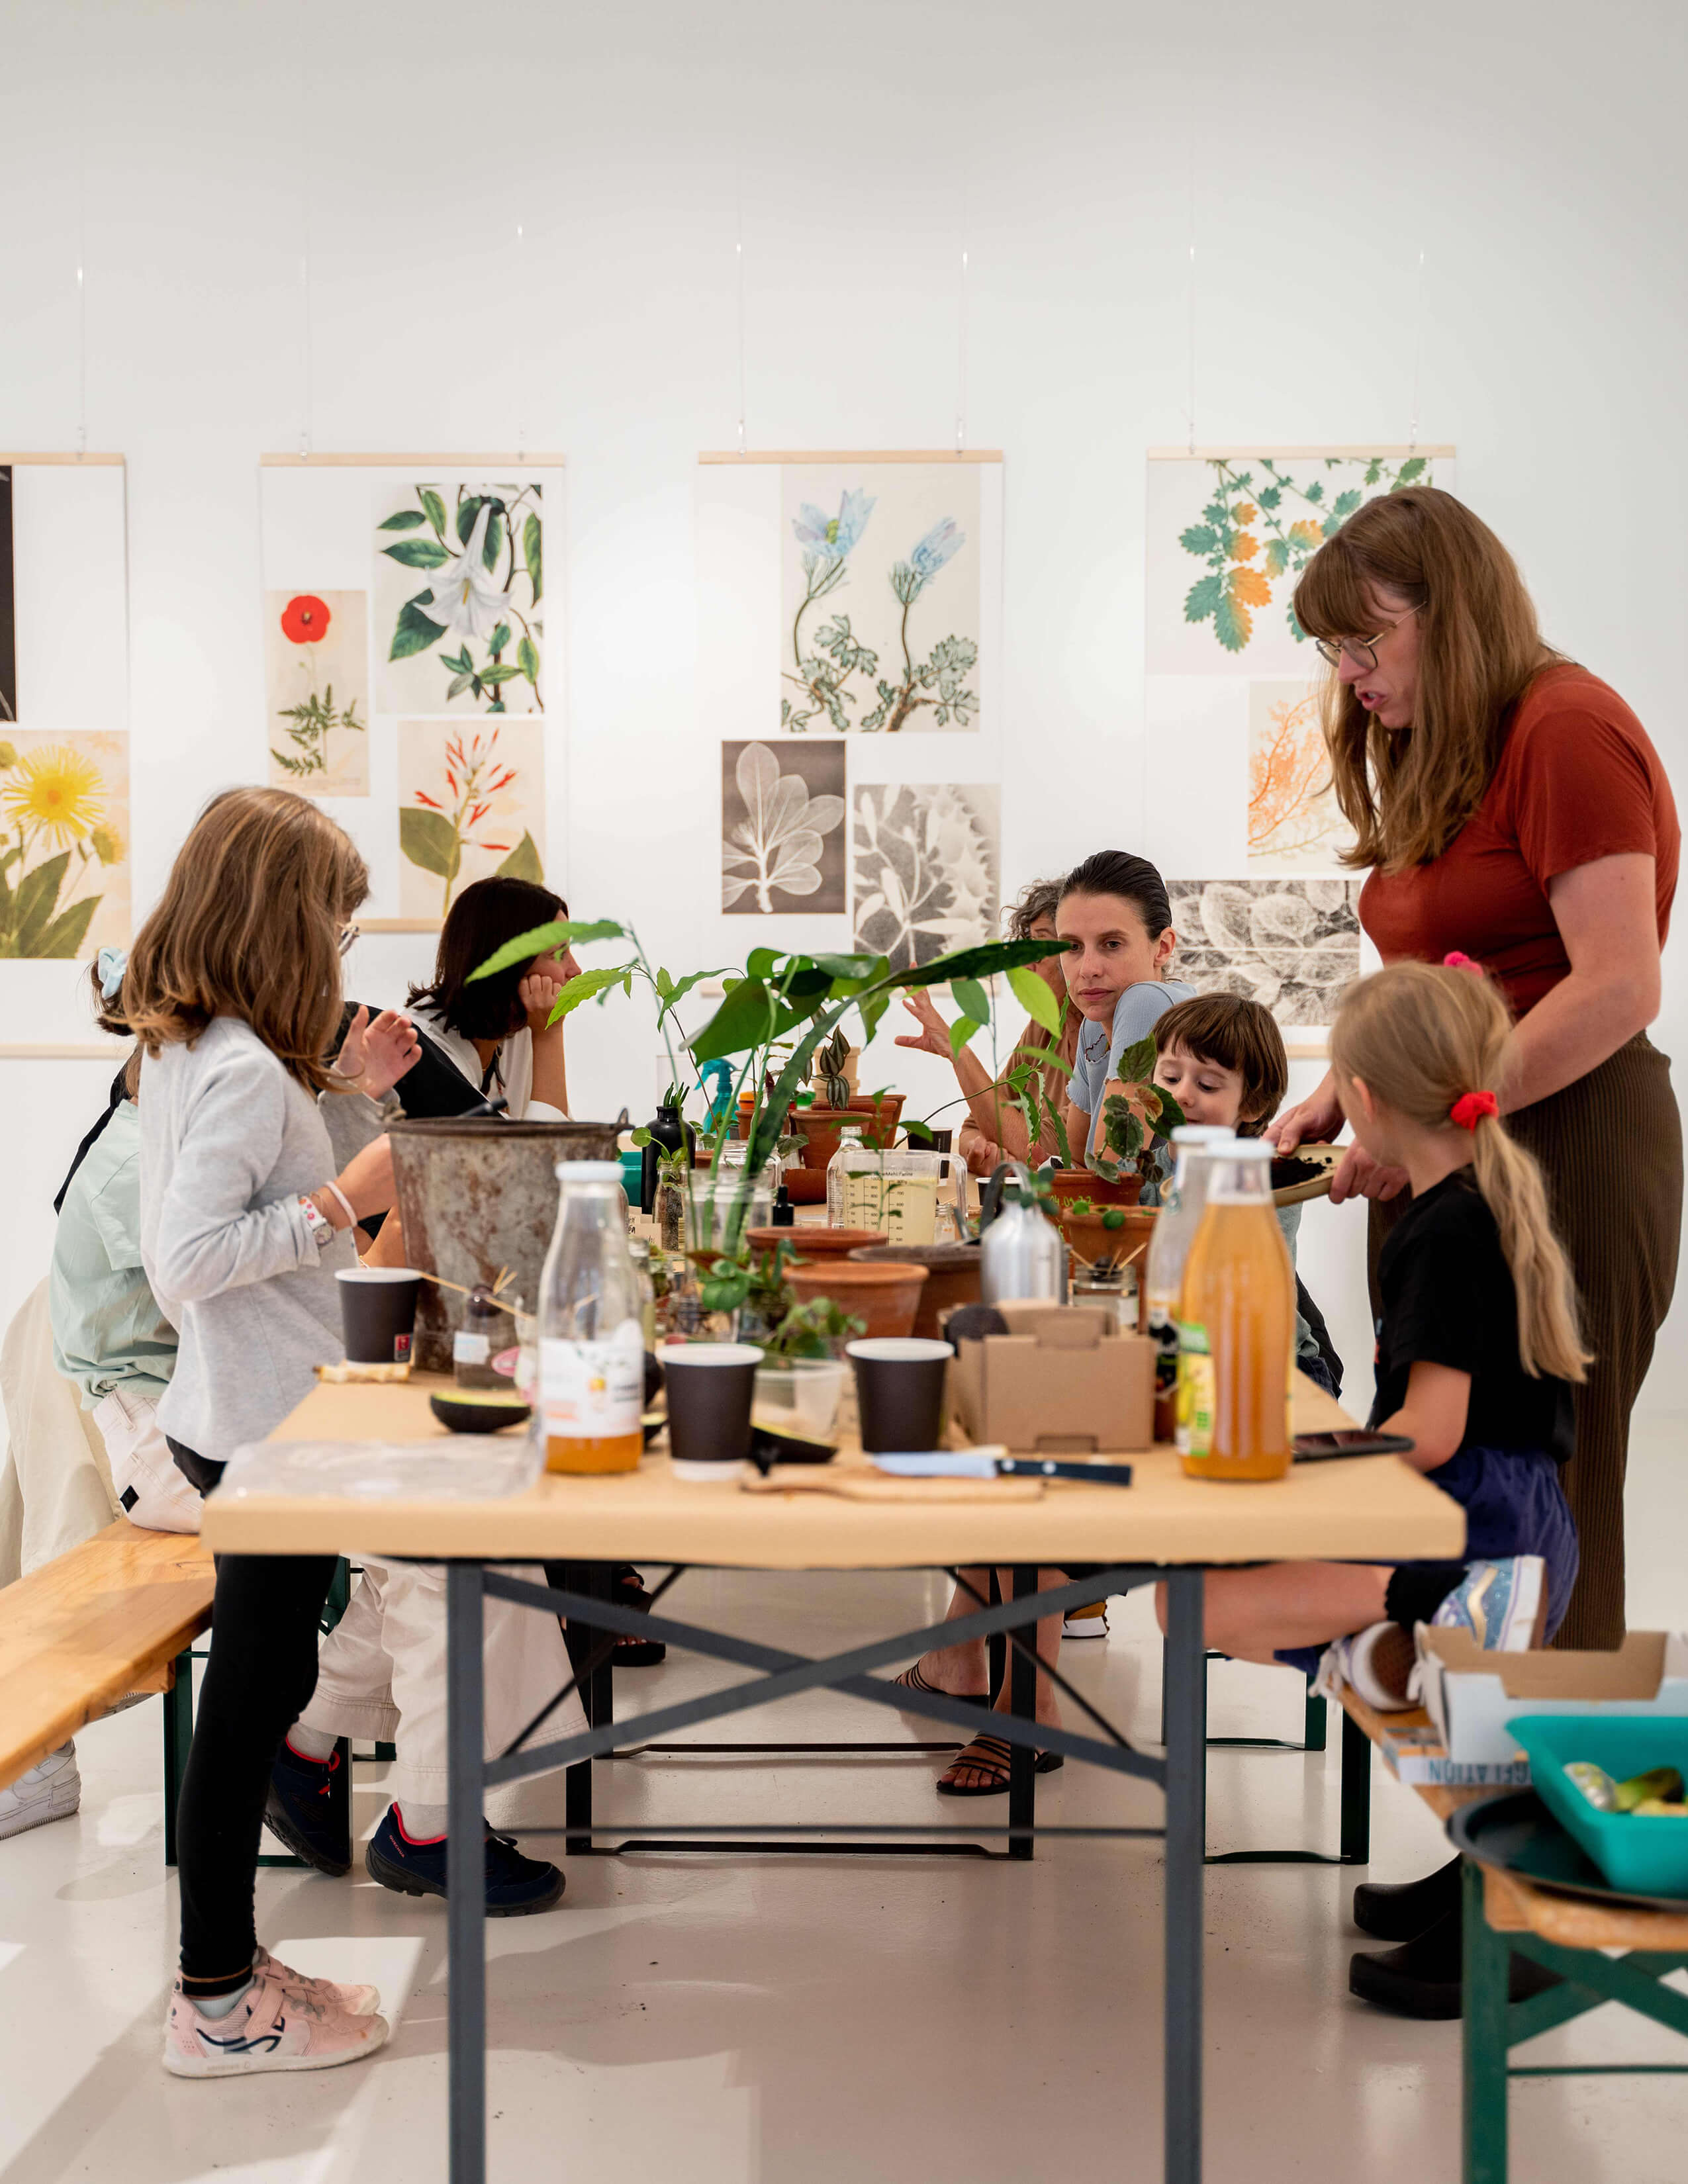 A group of kids with their parents surround the table, which is filled with a load of materials on the surface, ready to have the activity in the workshop.